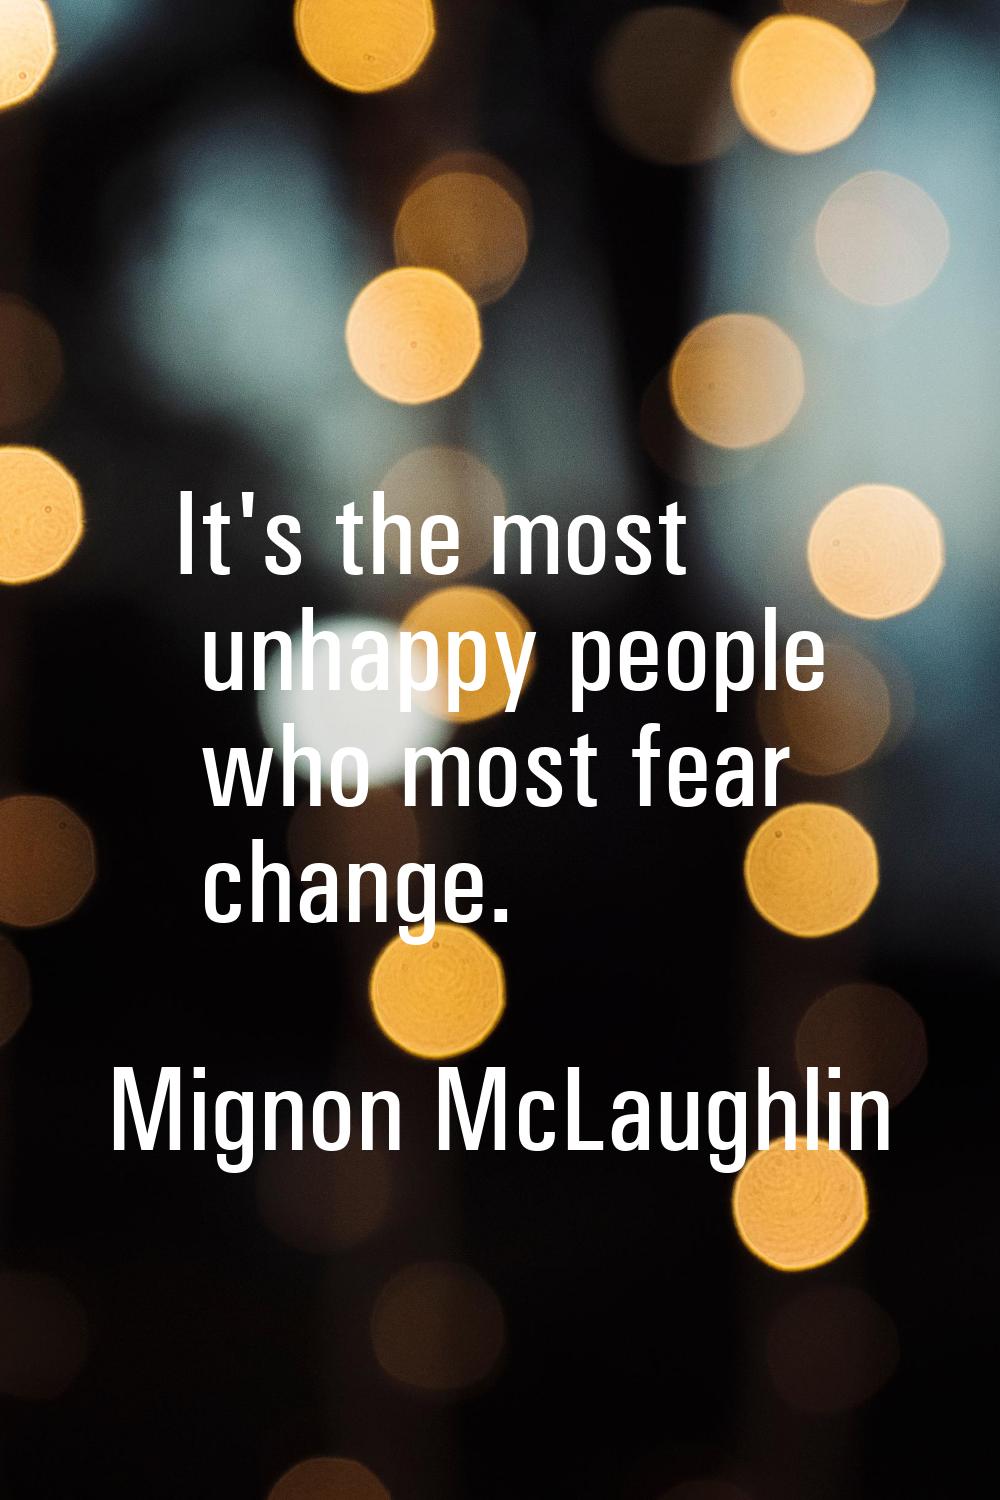 It's the most unhappy people who most fear change.